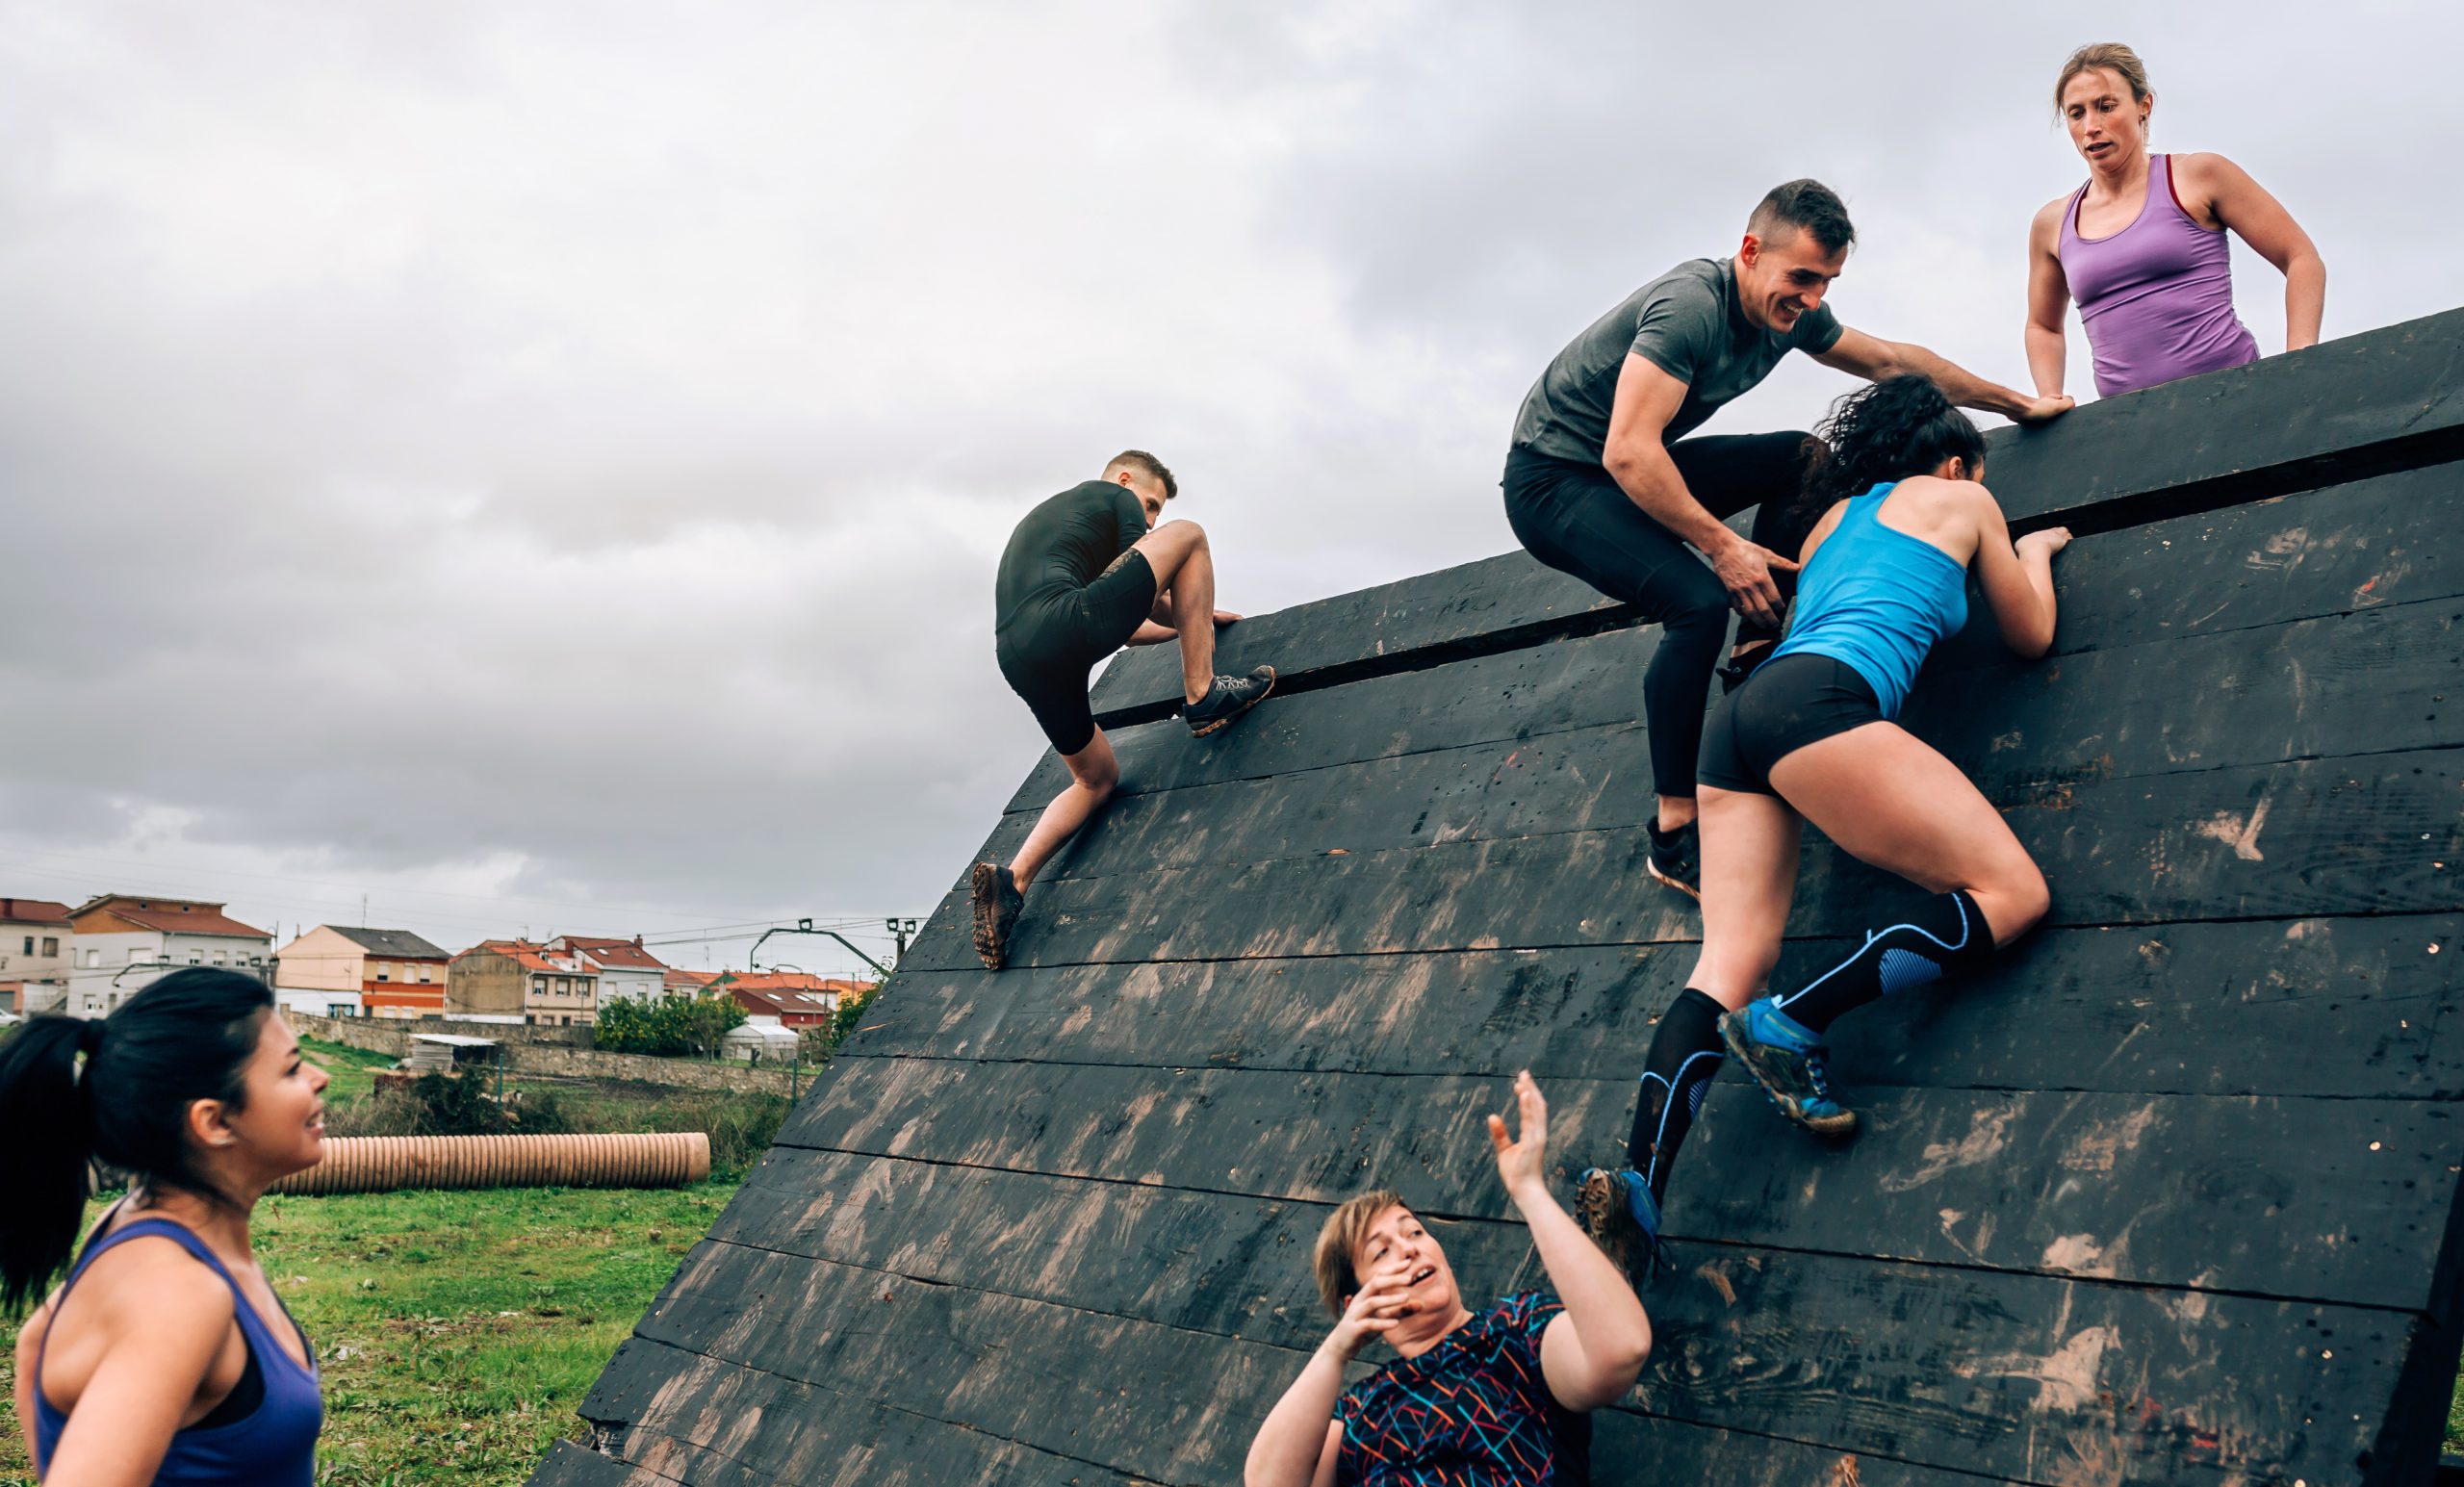 Participants in obstacle course climbing pyramid obstacle denver